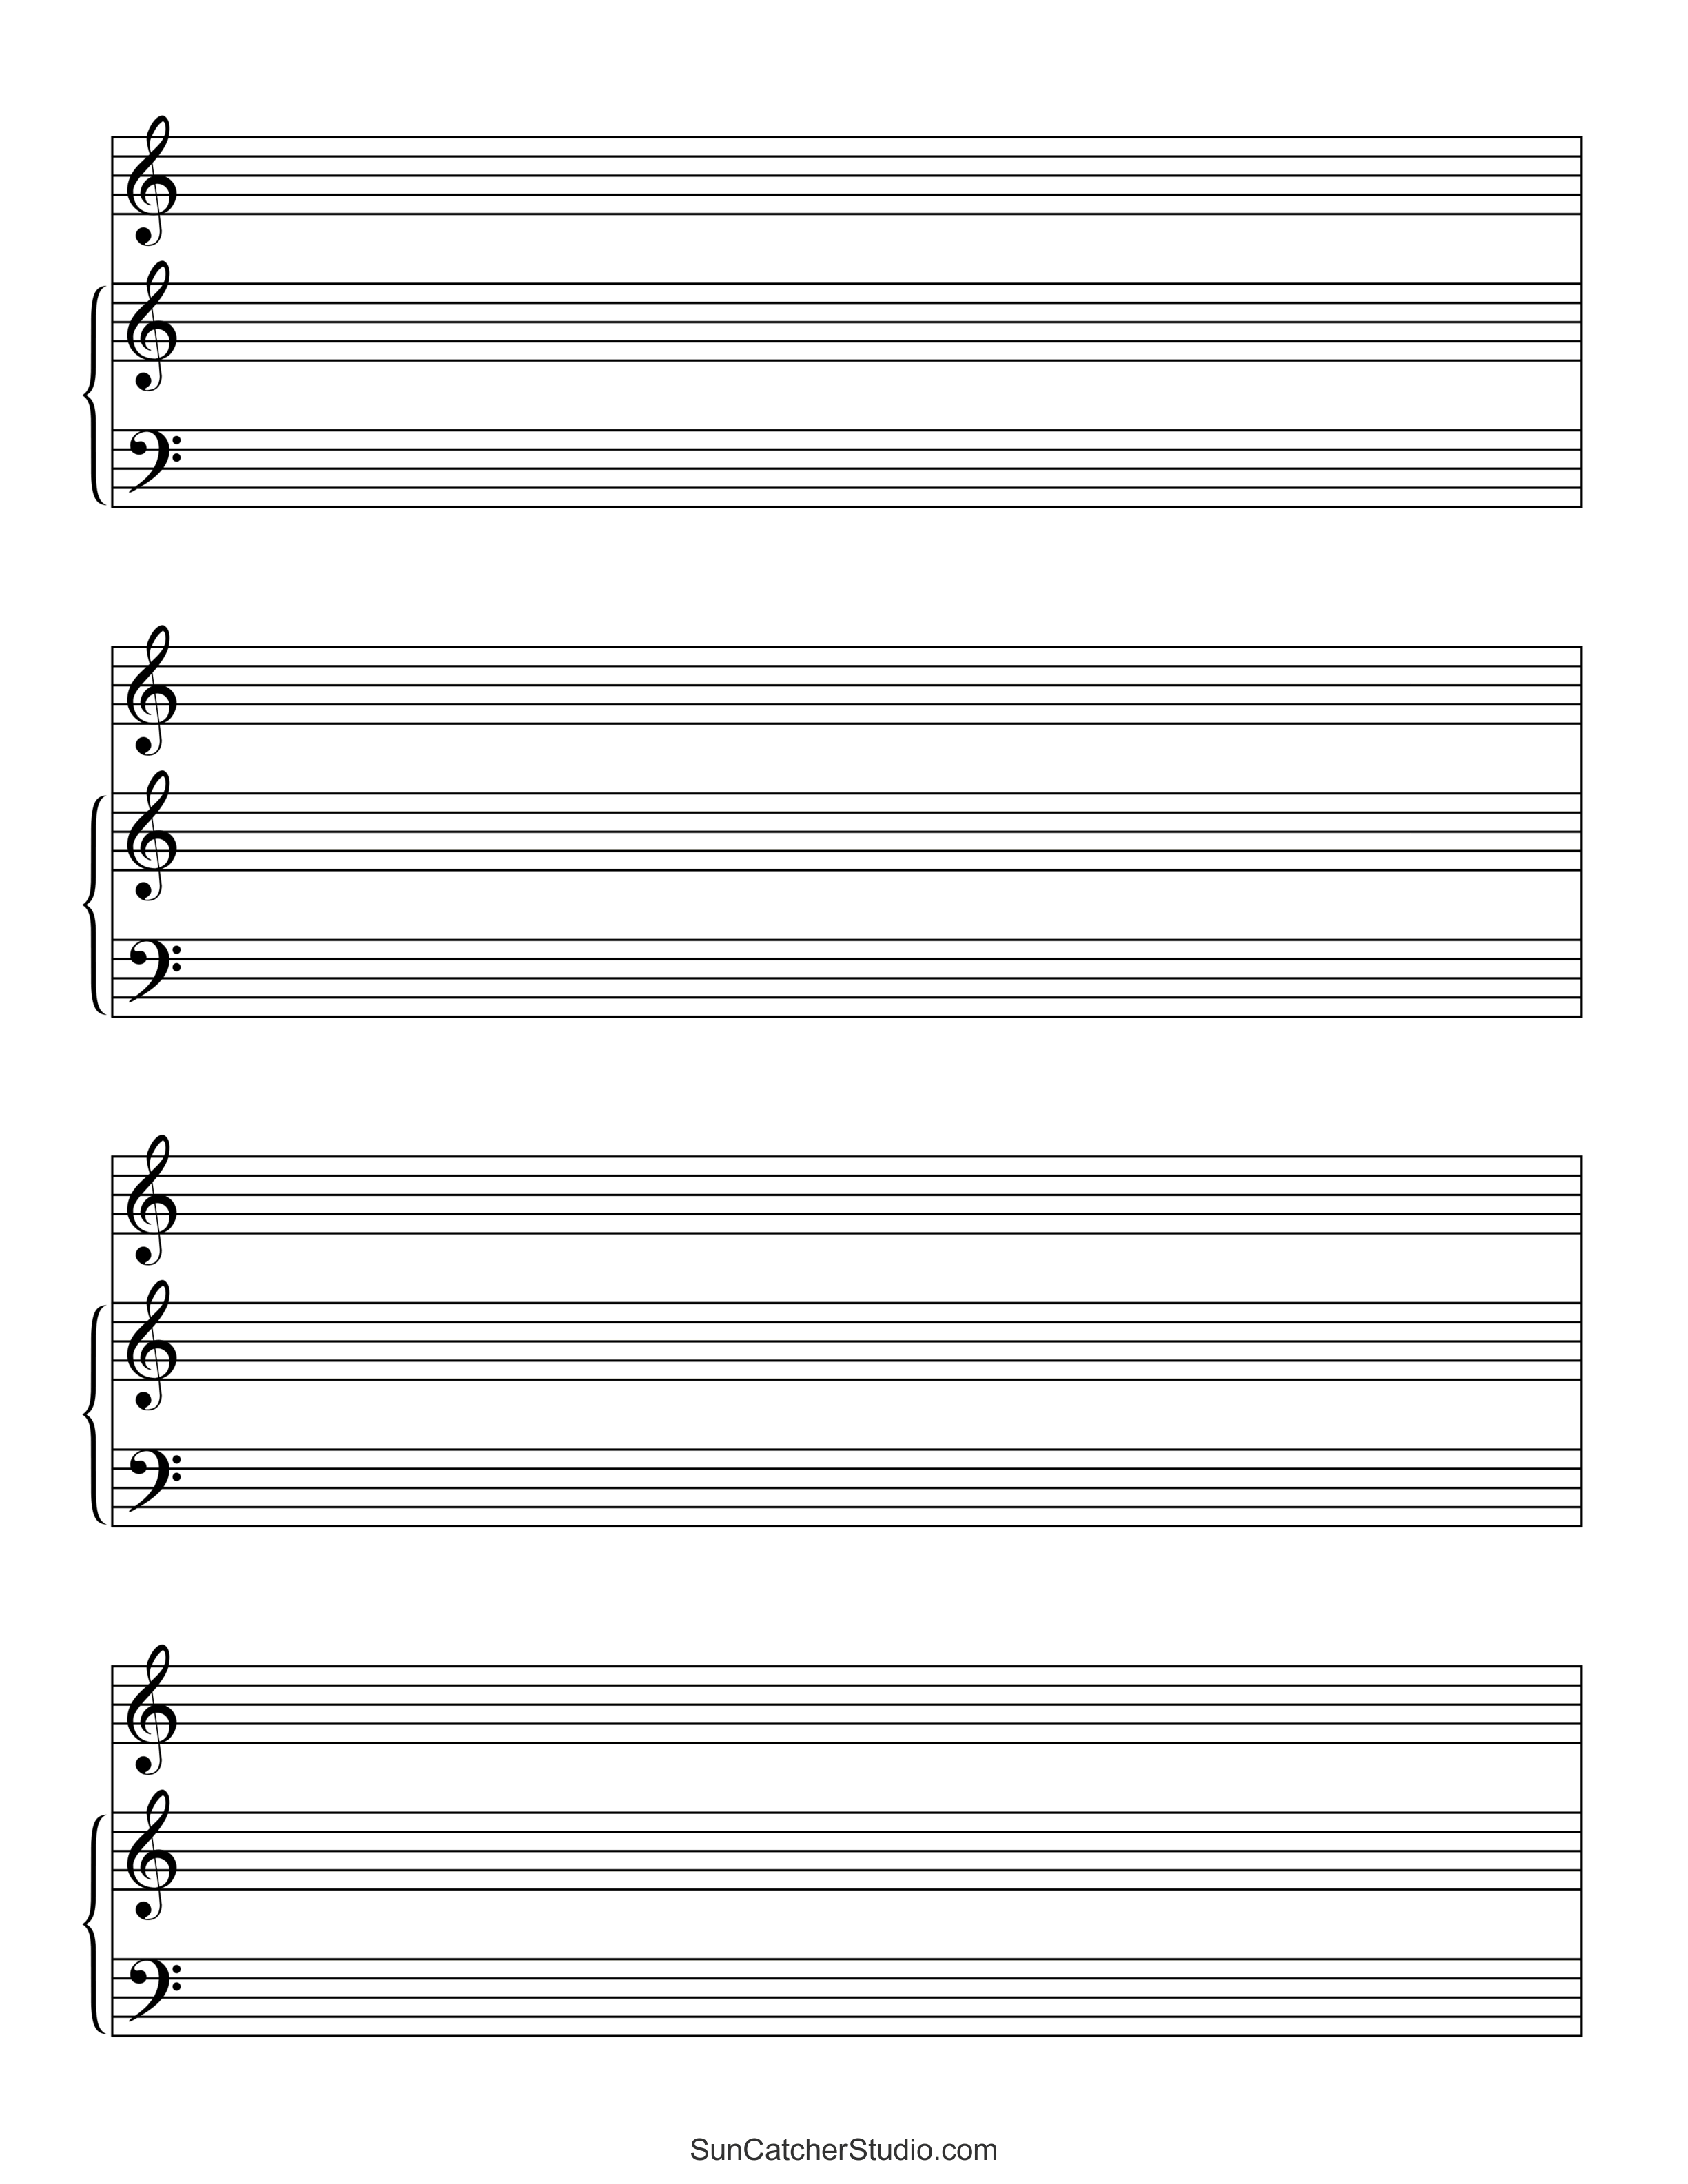 Blank Sheet Music (Free Printable Staff Paper) DIY Projects Patterns